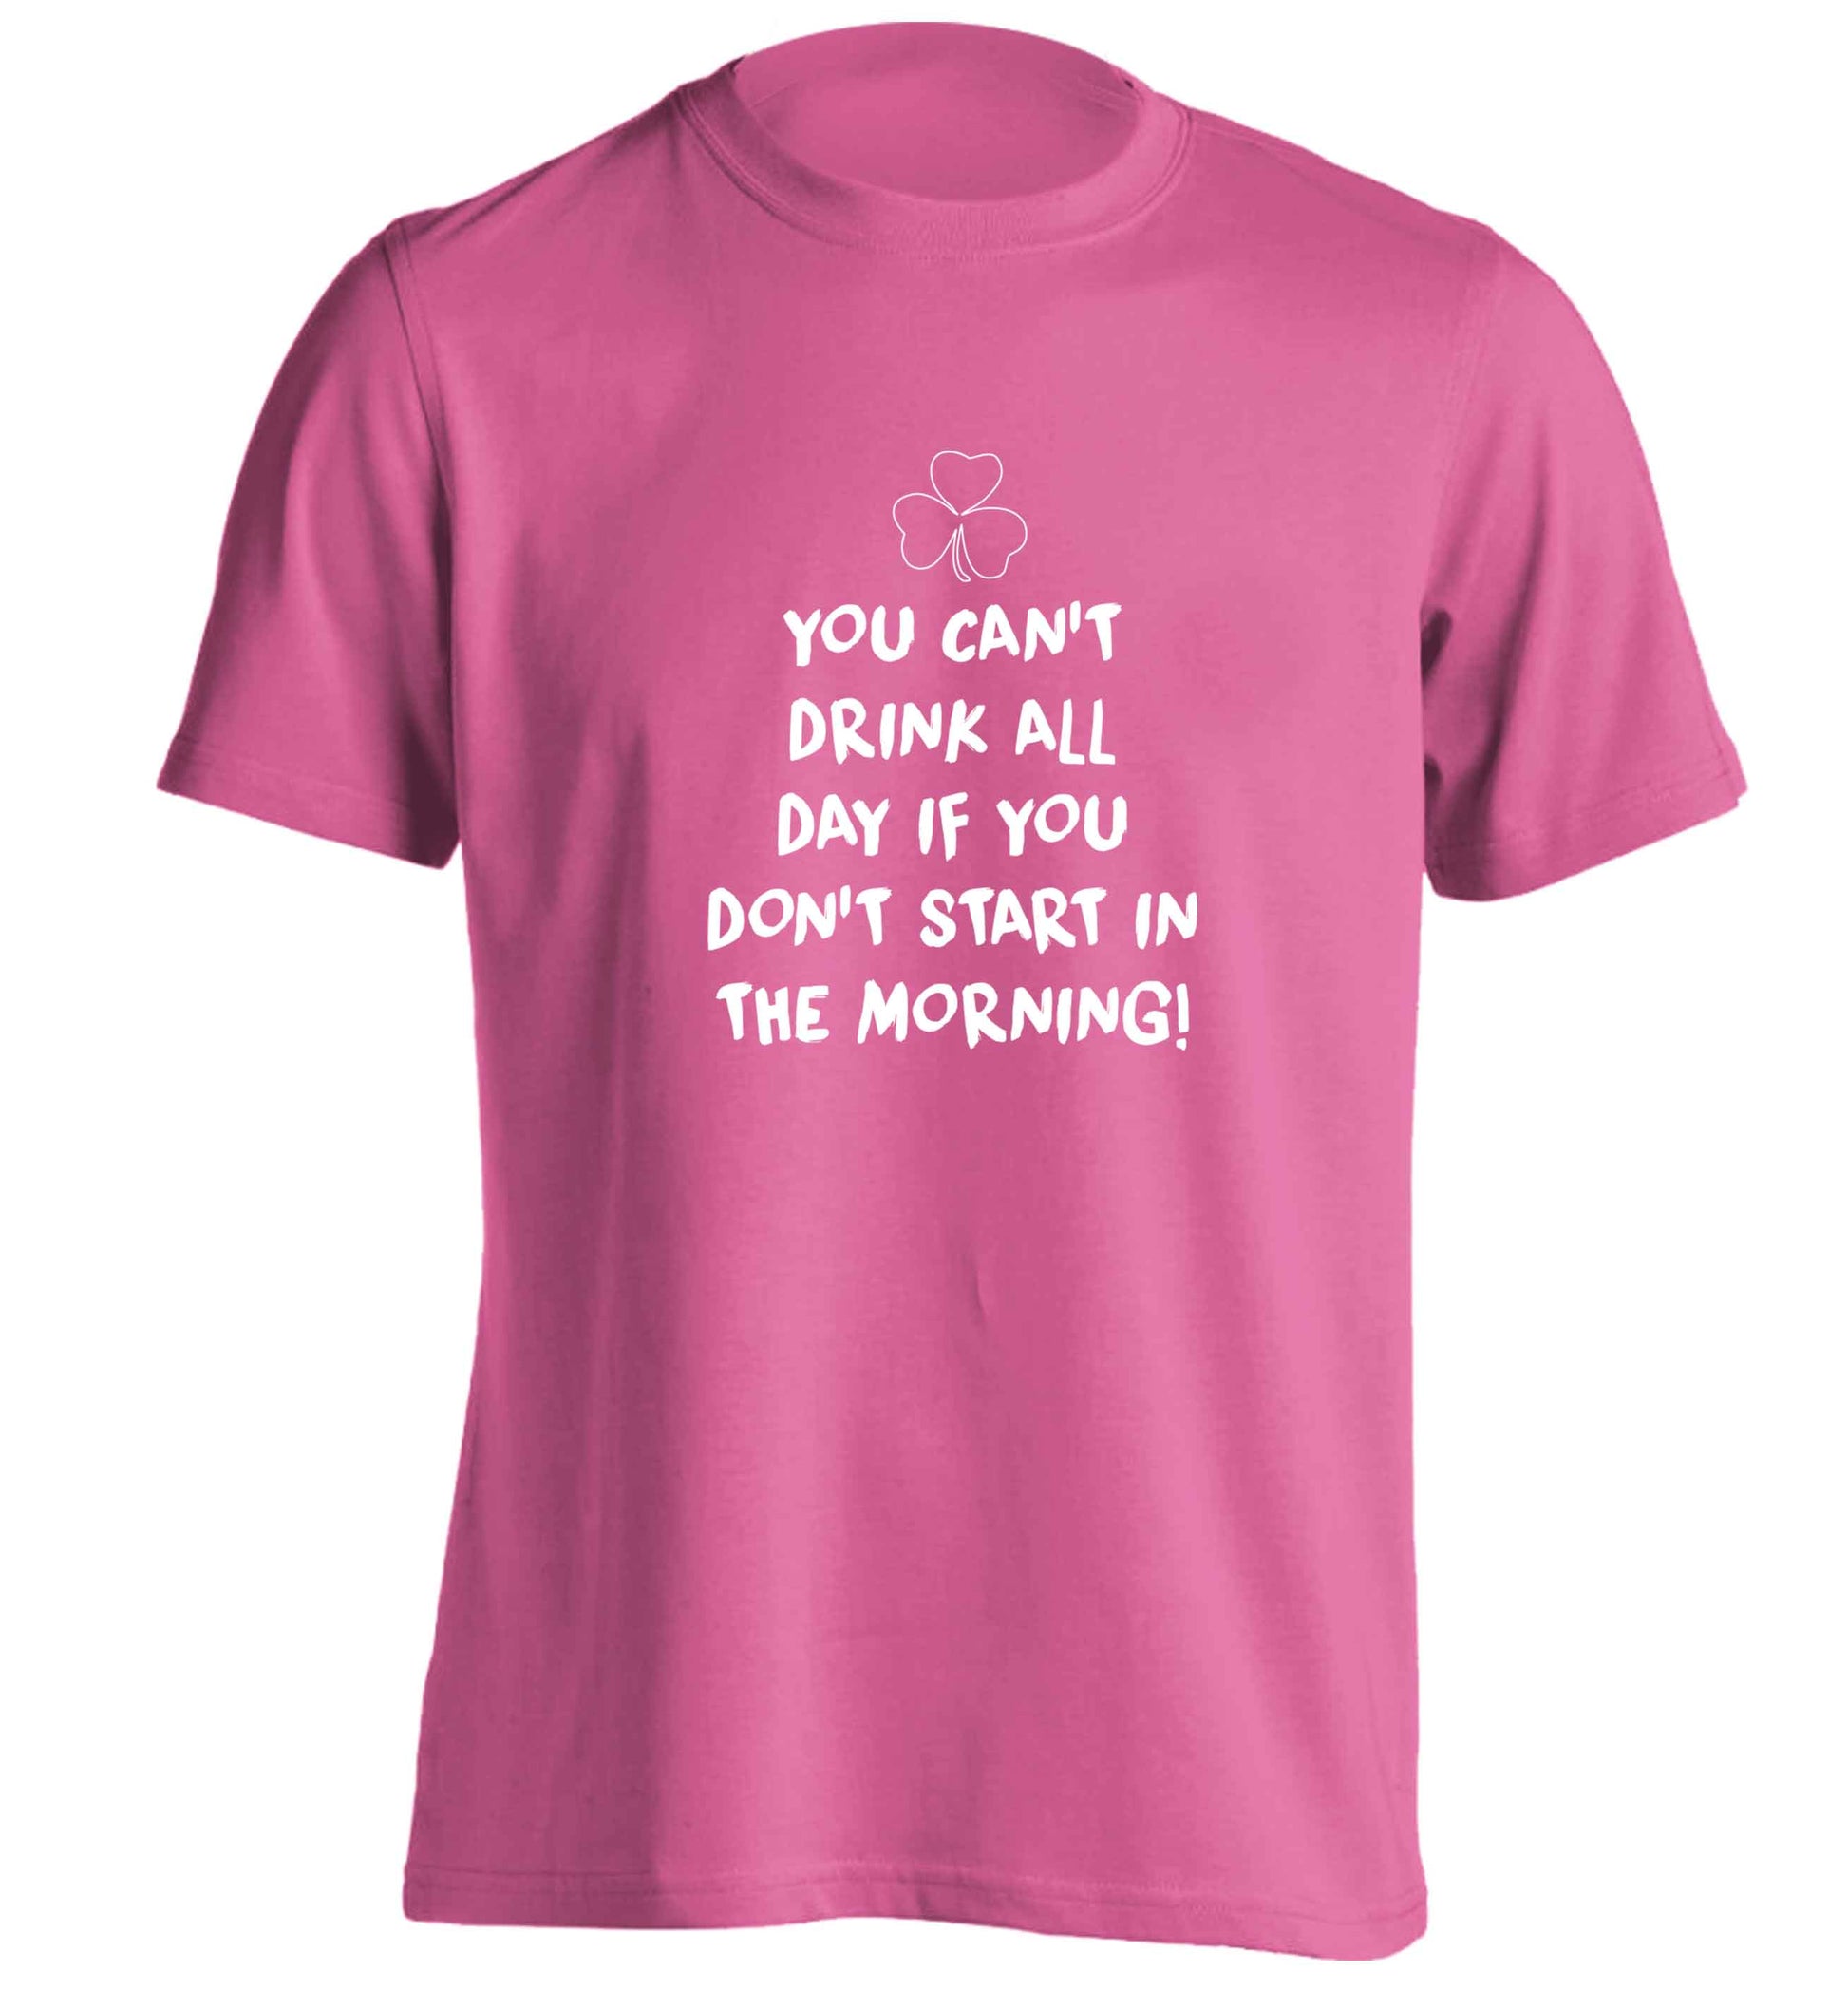 You can't drink all day if you don't start in the morning adults unisex pink Tshirt 2XL